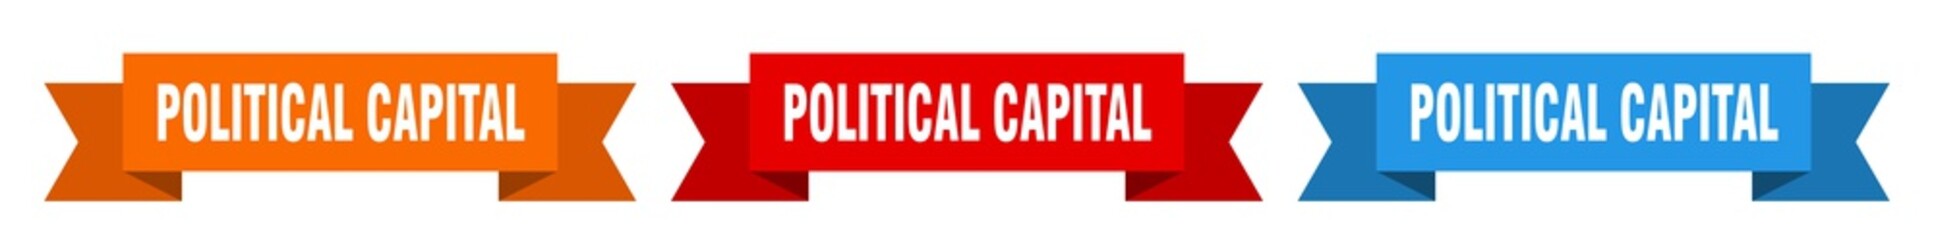 political capital ribbon. political capital isolated paper sign. banner